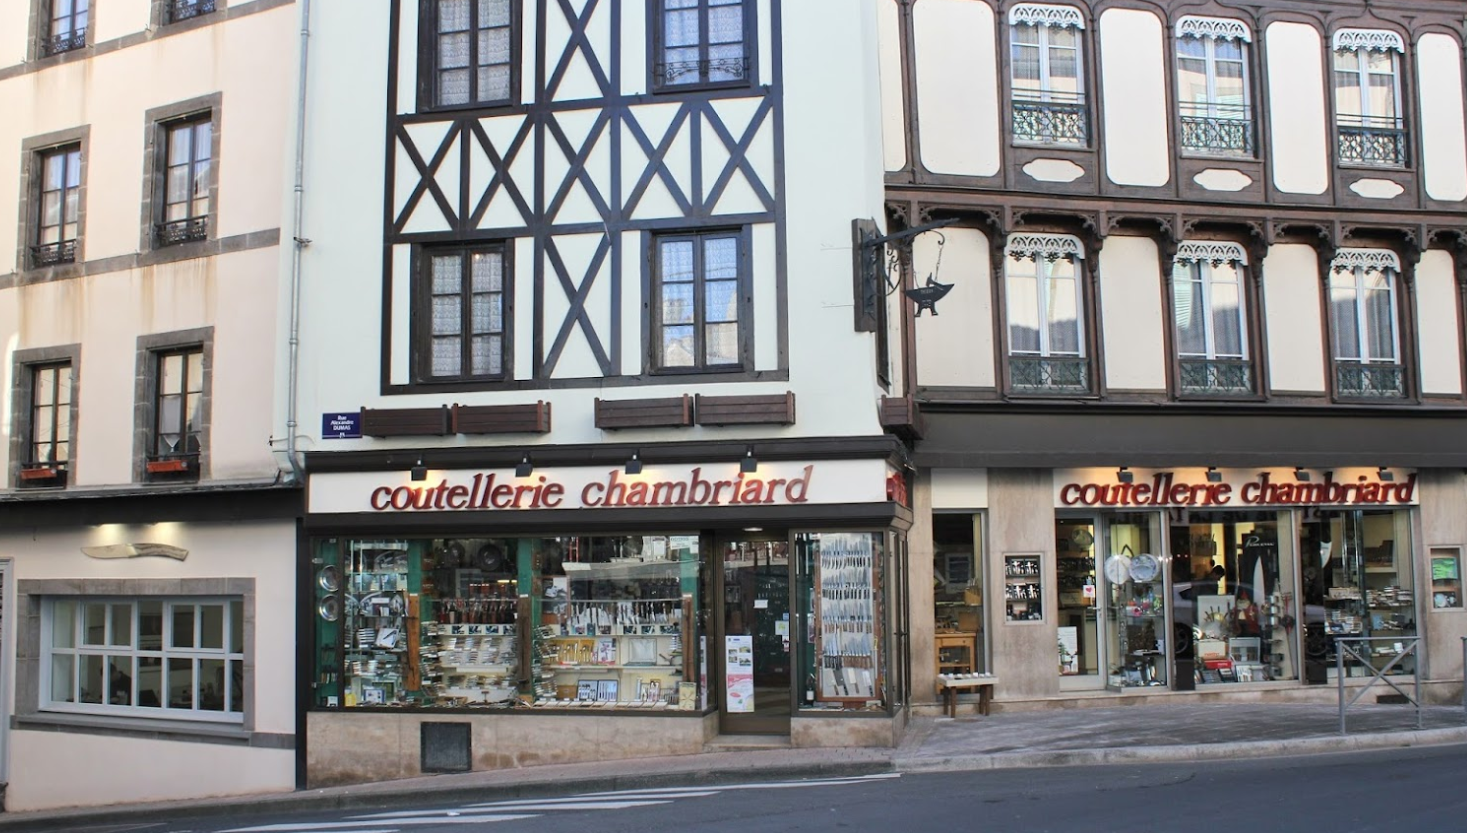  The 5 BEST Places to get Cuchillos de cocina in Thiers,France.